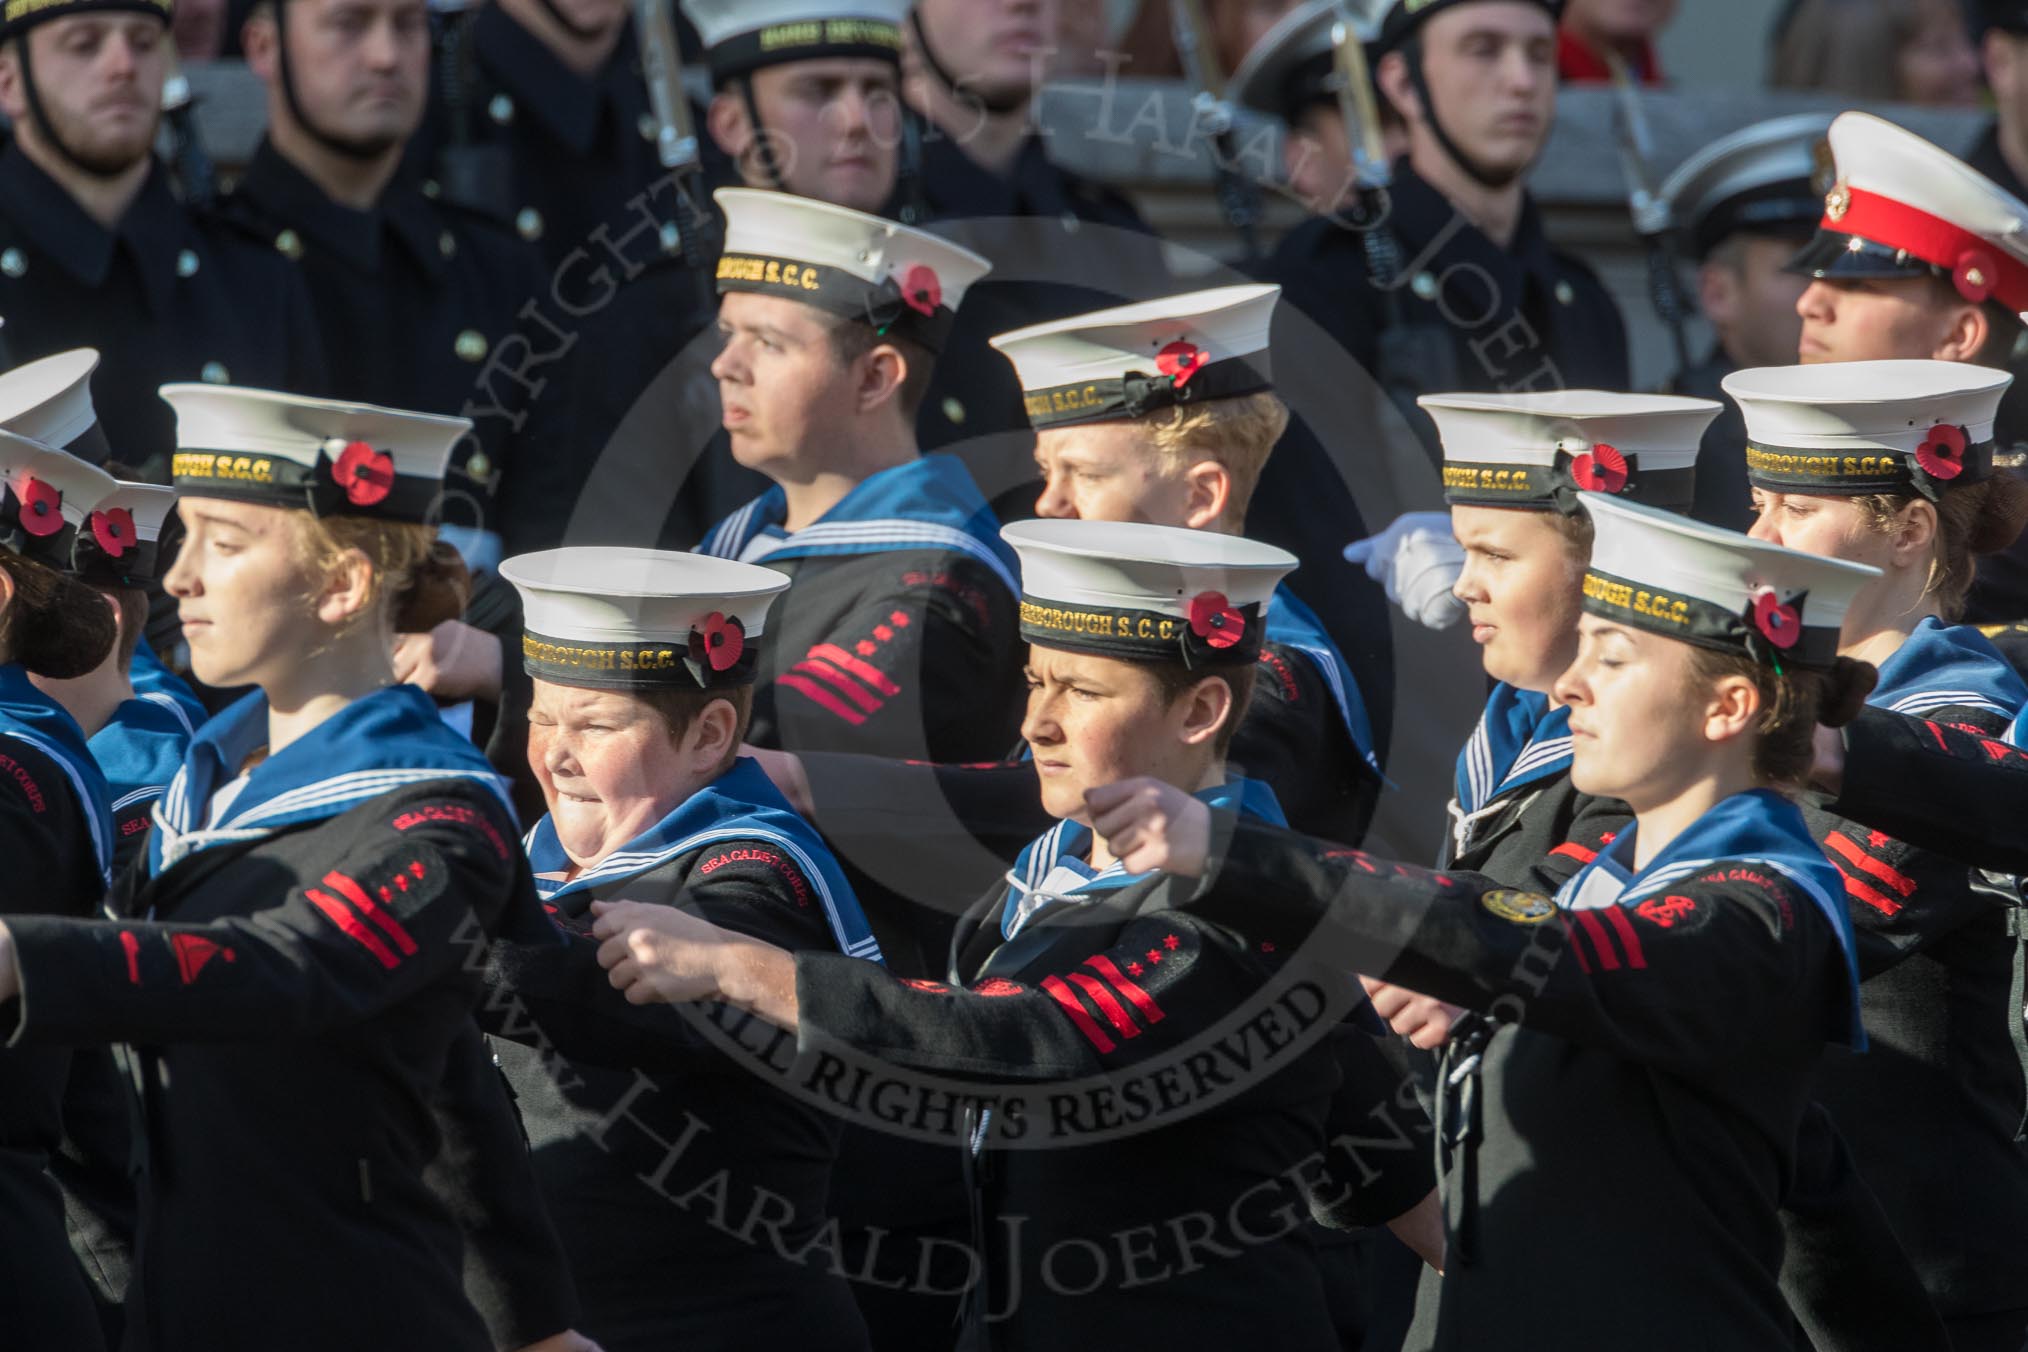 March Past, Remembrance Sunday at the Cenotaph 2016: M32 Army and combined Cadet Force.
Cenotaph, Whitehall, London SW1,
London,
Greater London,
United Kingdom,
on 13 November 2016 at 13:18, image #2817